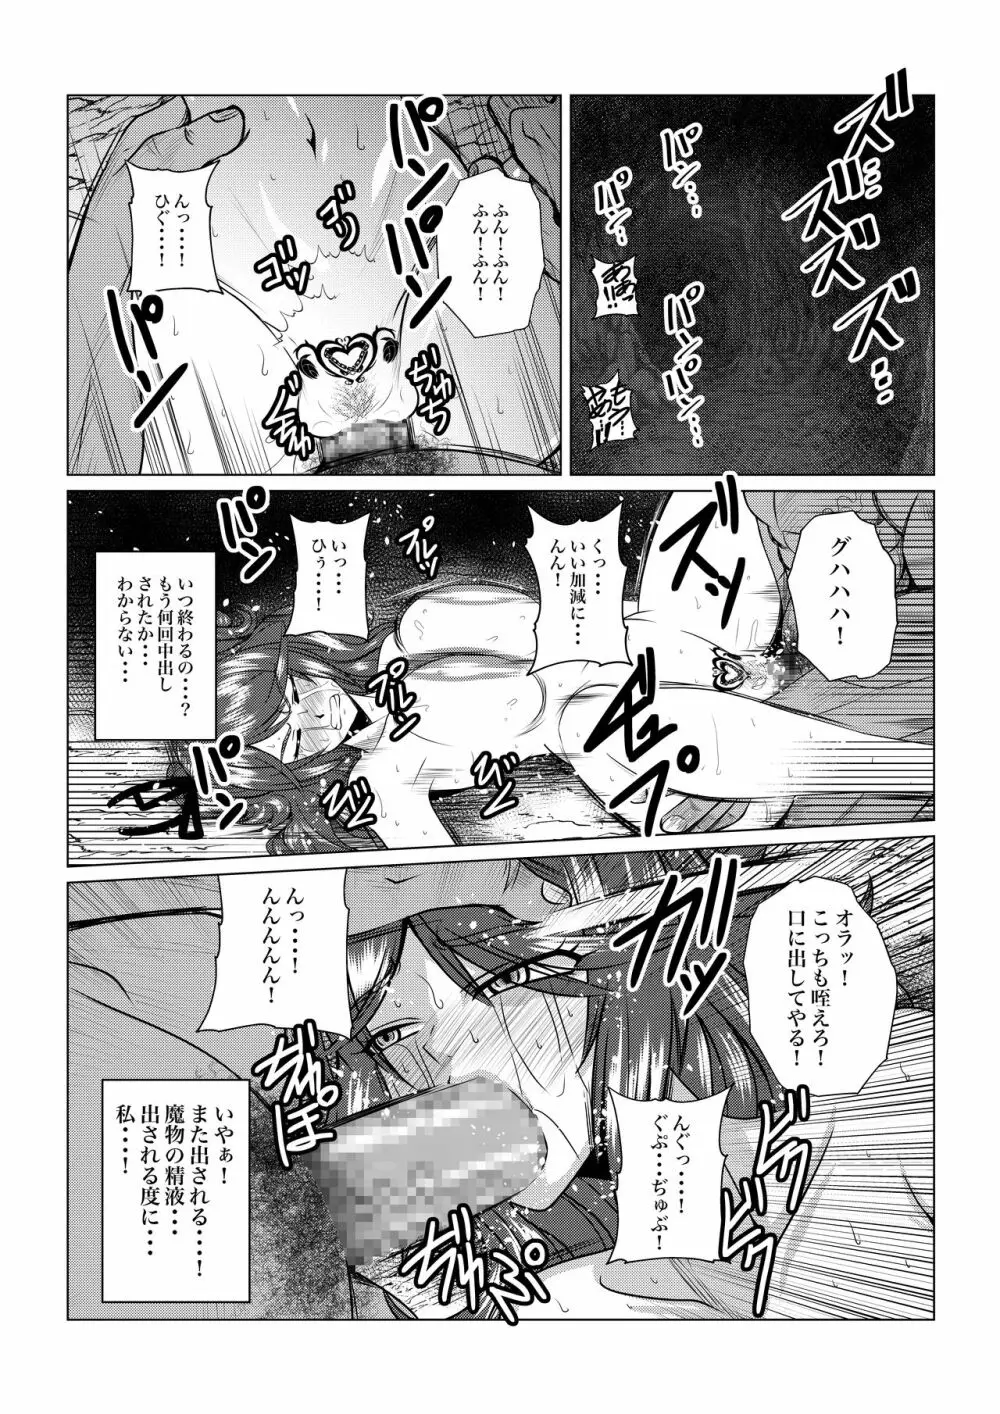 Tales Of DarkSide〜三散華〜 Page.3